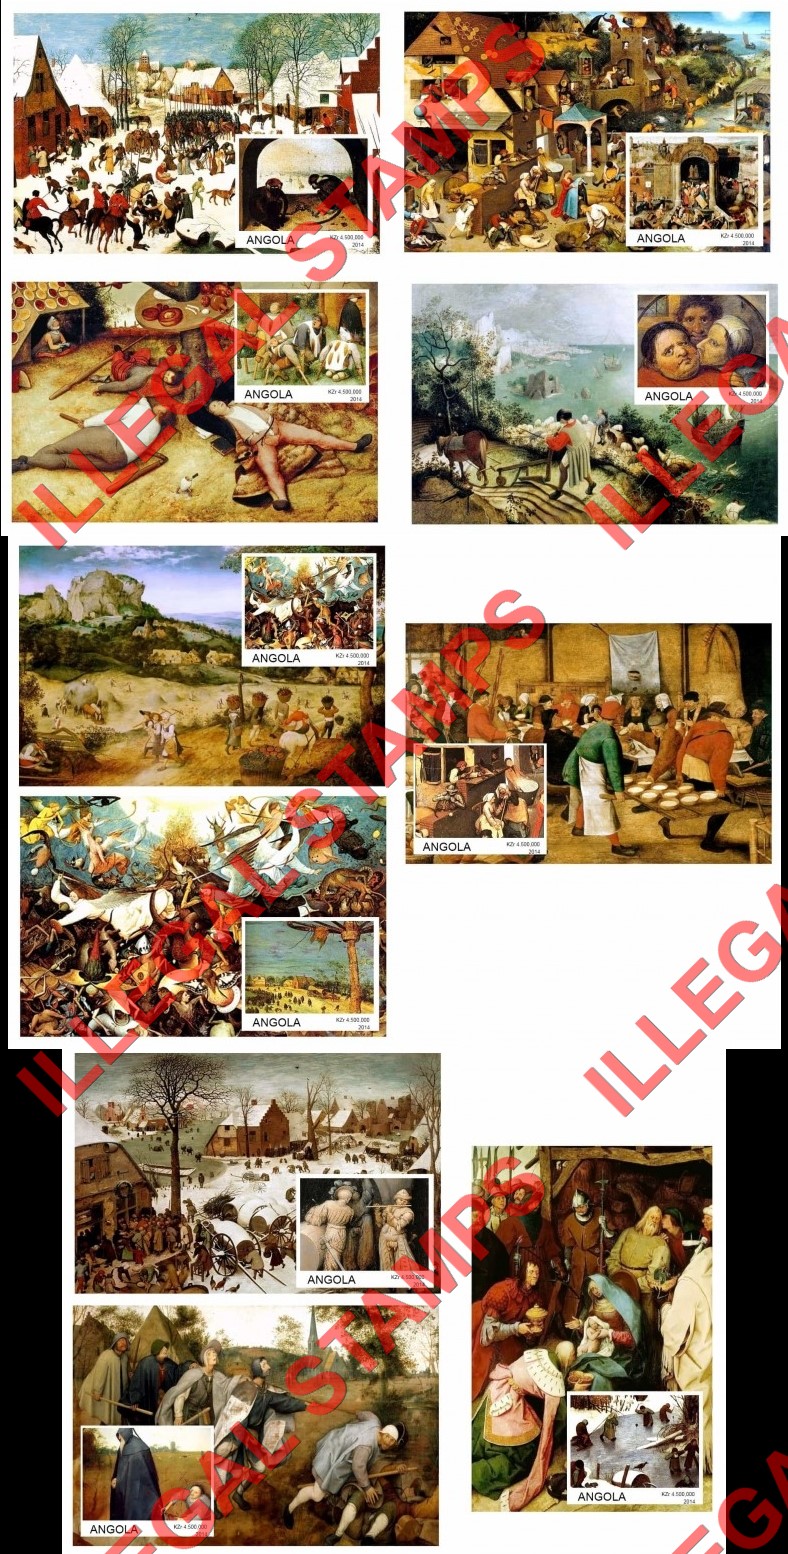 Angola 2014 Paintings by Peter Bruegel Illegal Stamp Souvenir Sheets of 1 (Part 2)